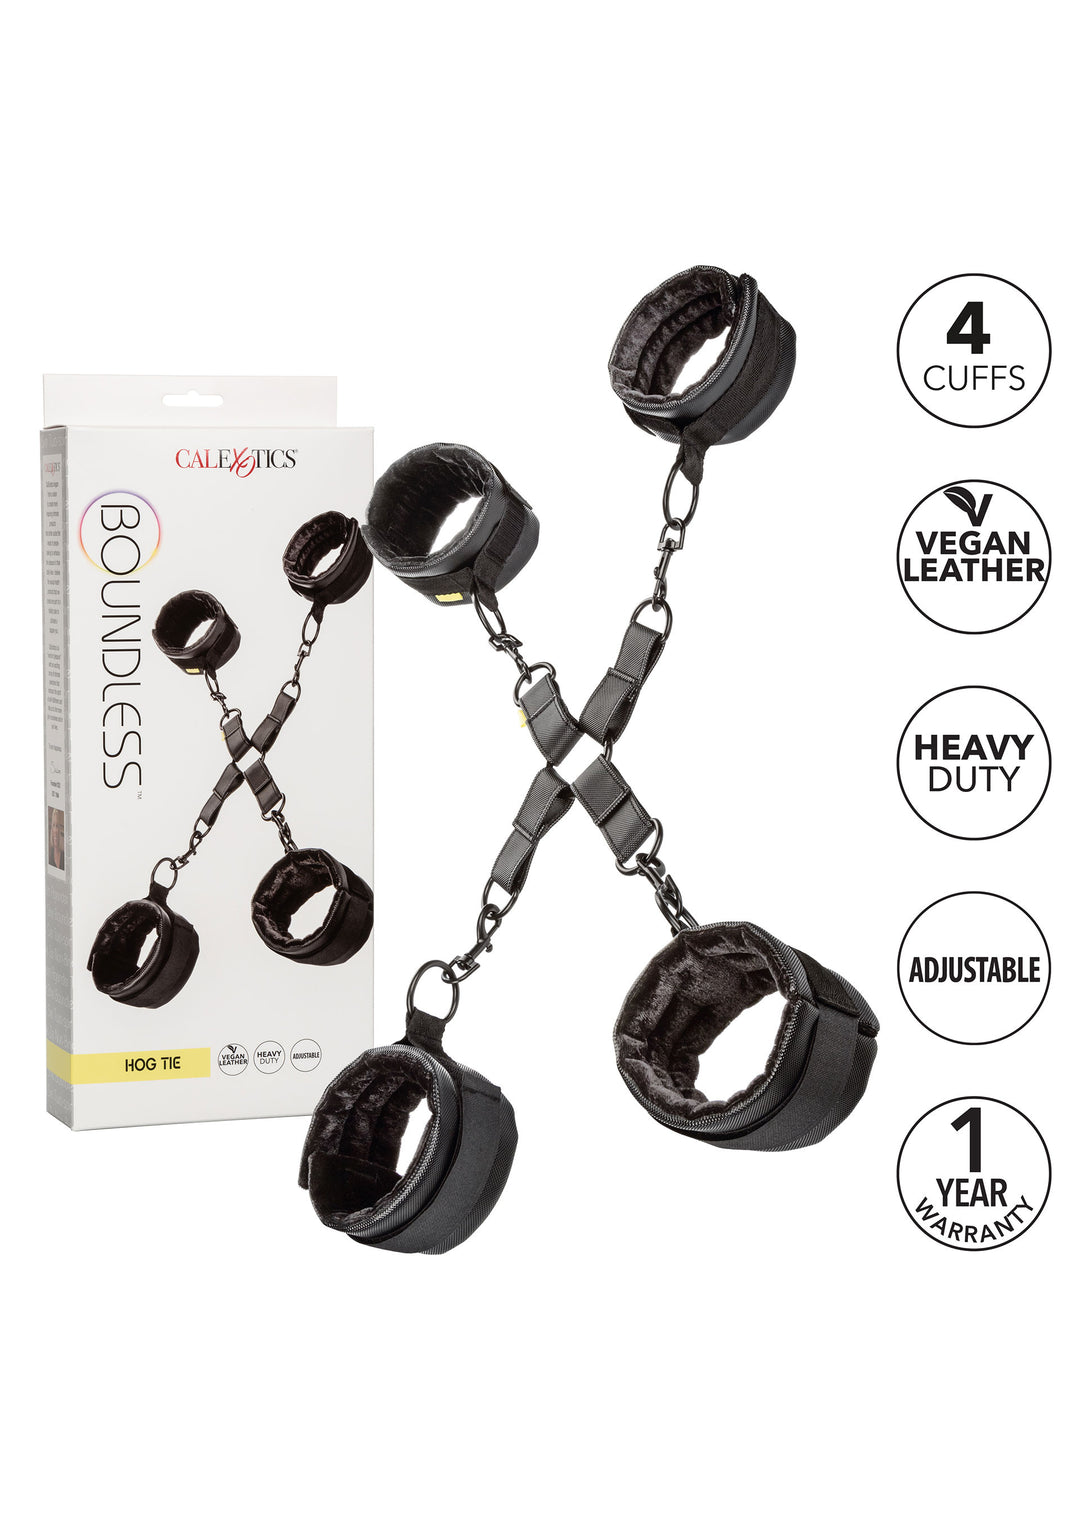 Kit of 4 Boundless Hog Tie ankle cuffs